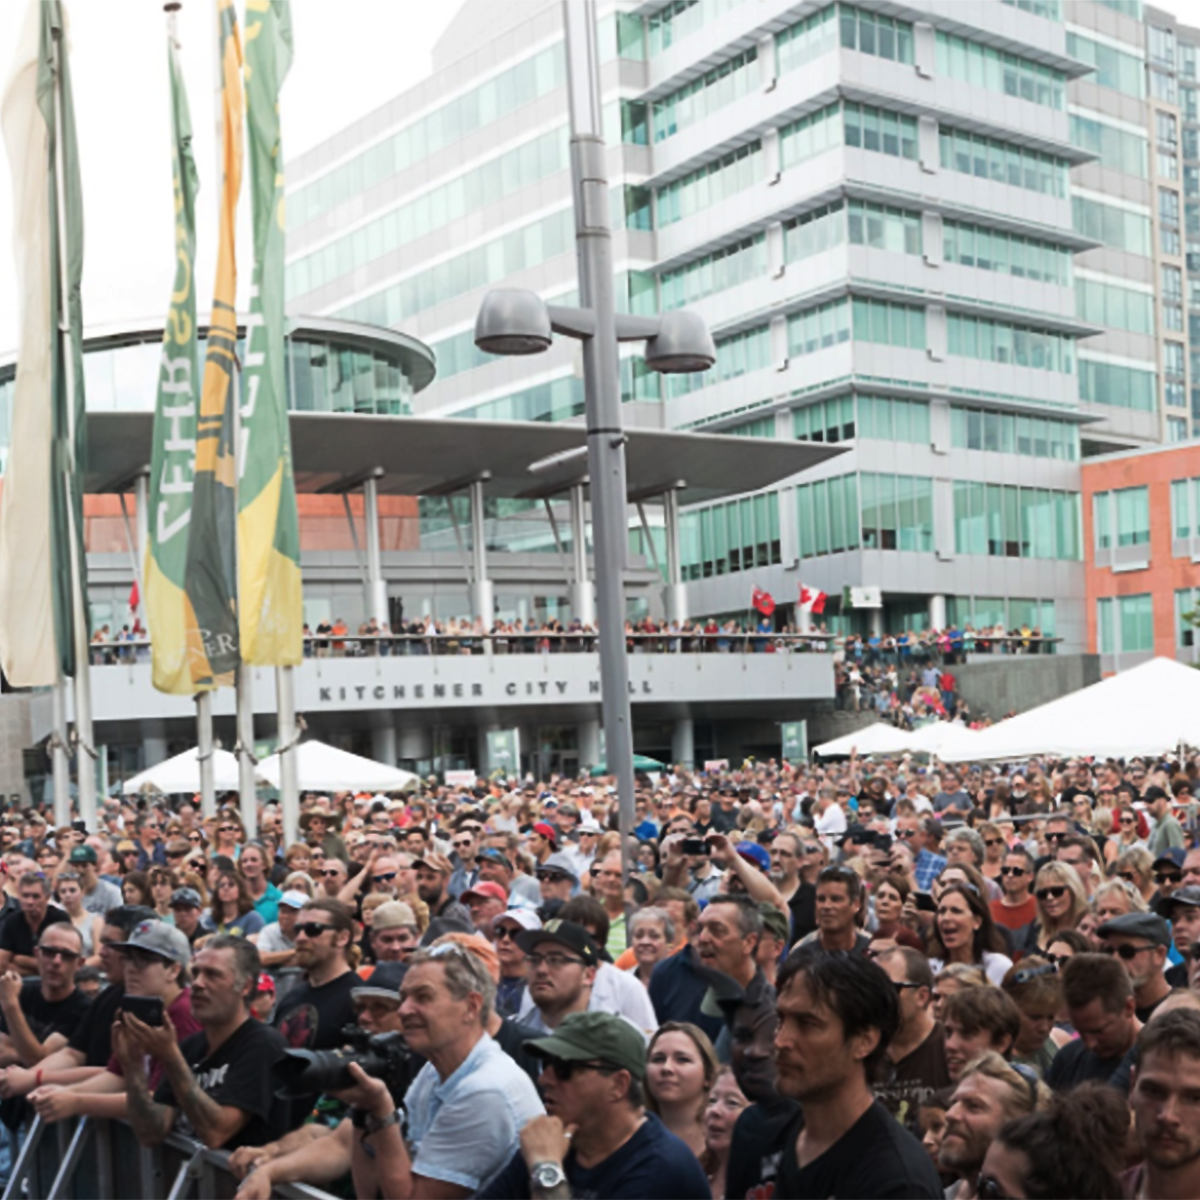 Kitchener Blues Festival Cancelled – The Music Express